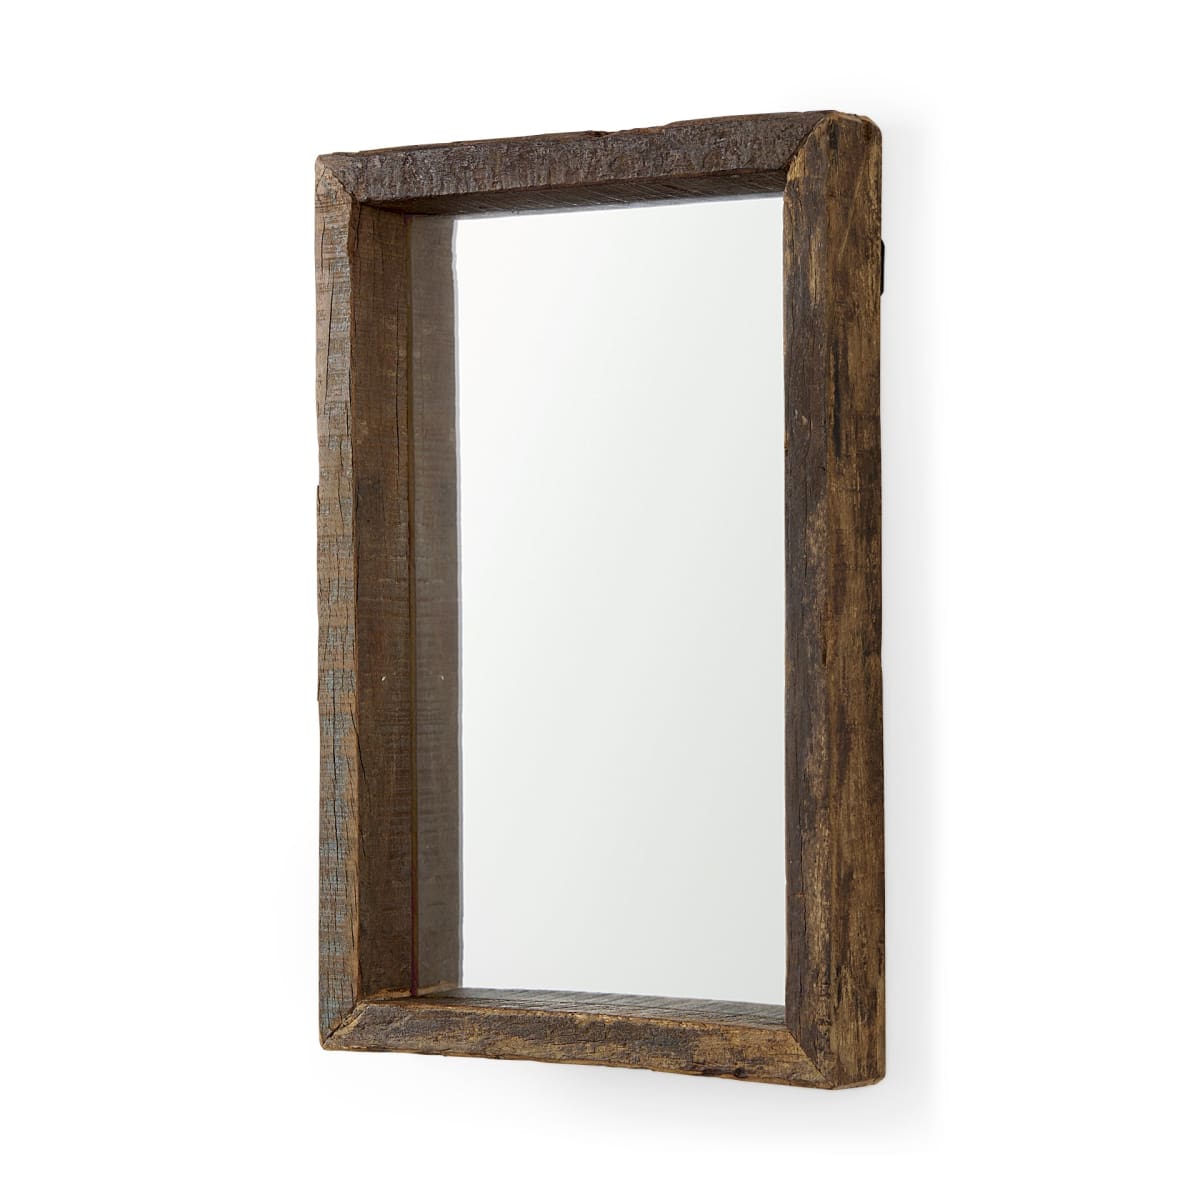 Gervaise Wall Mirror Brown Wood | 12L x 2W x 18H - wall-mirrors-grouped